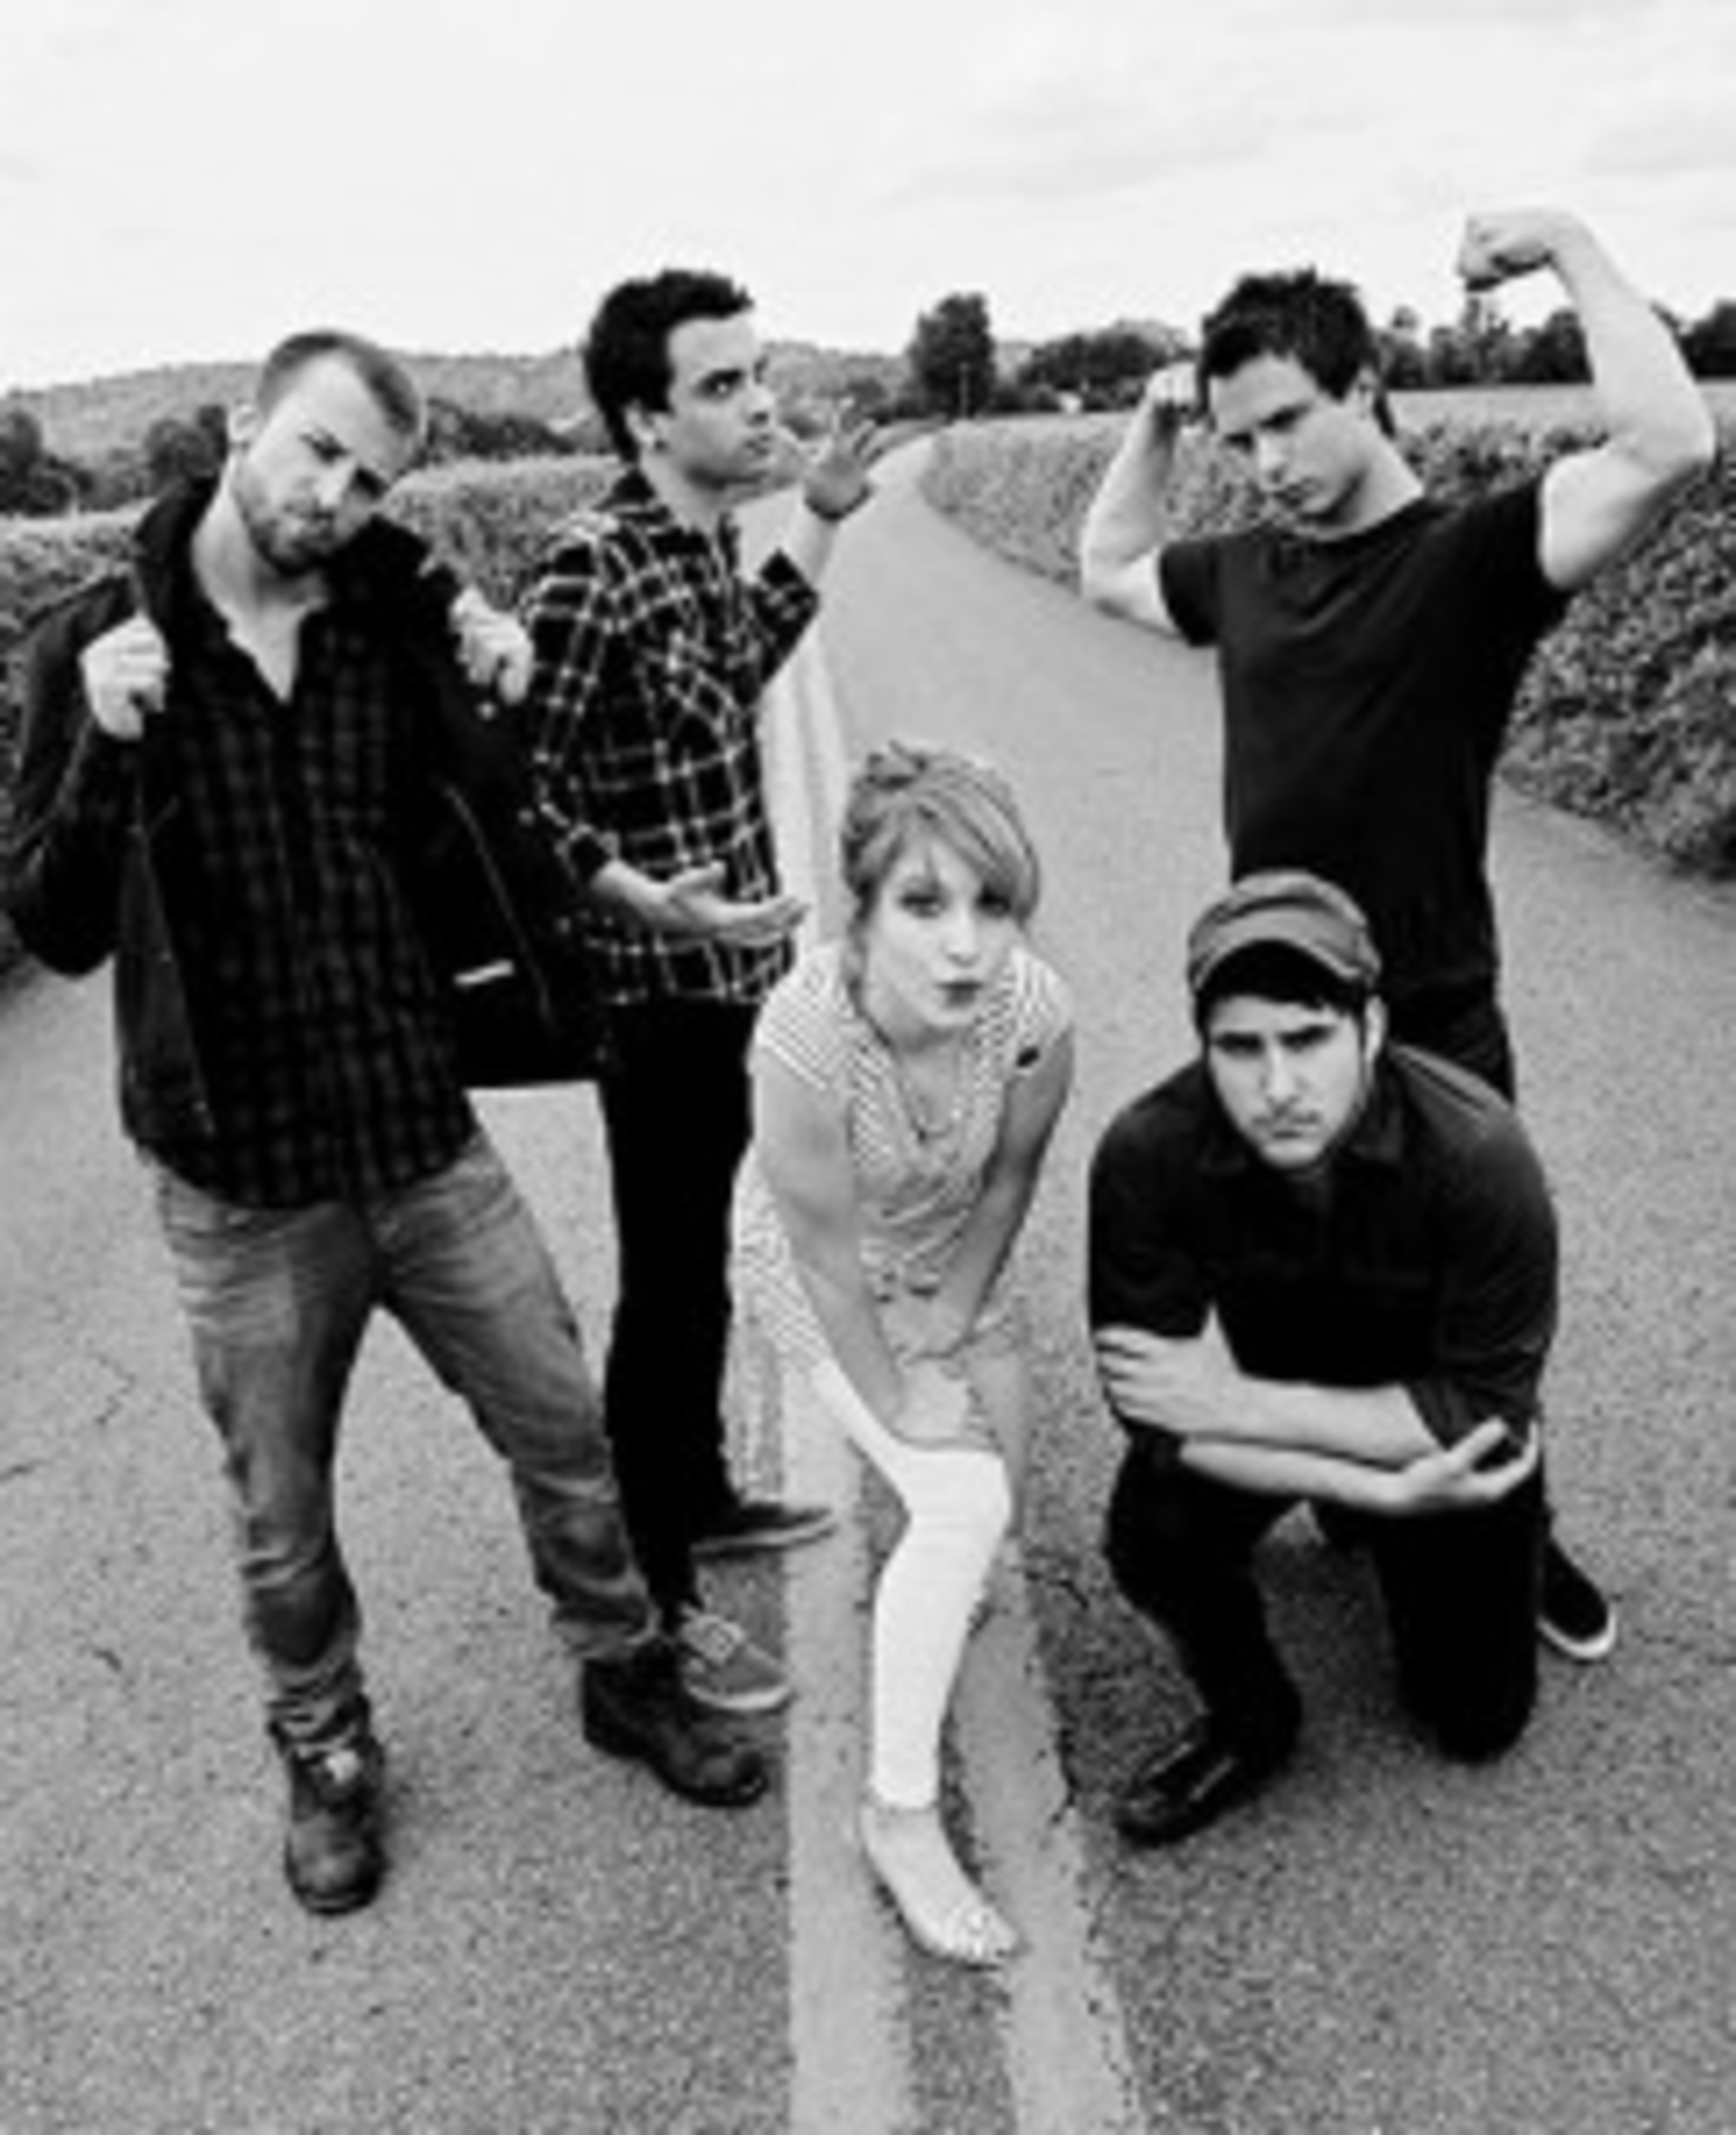 4 Simple Reasons Paramore's “Brand New Eyes” Is Their (Current